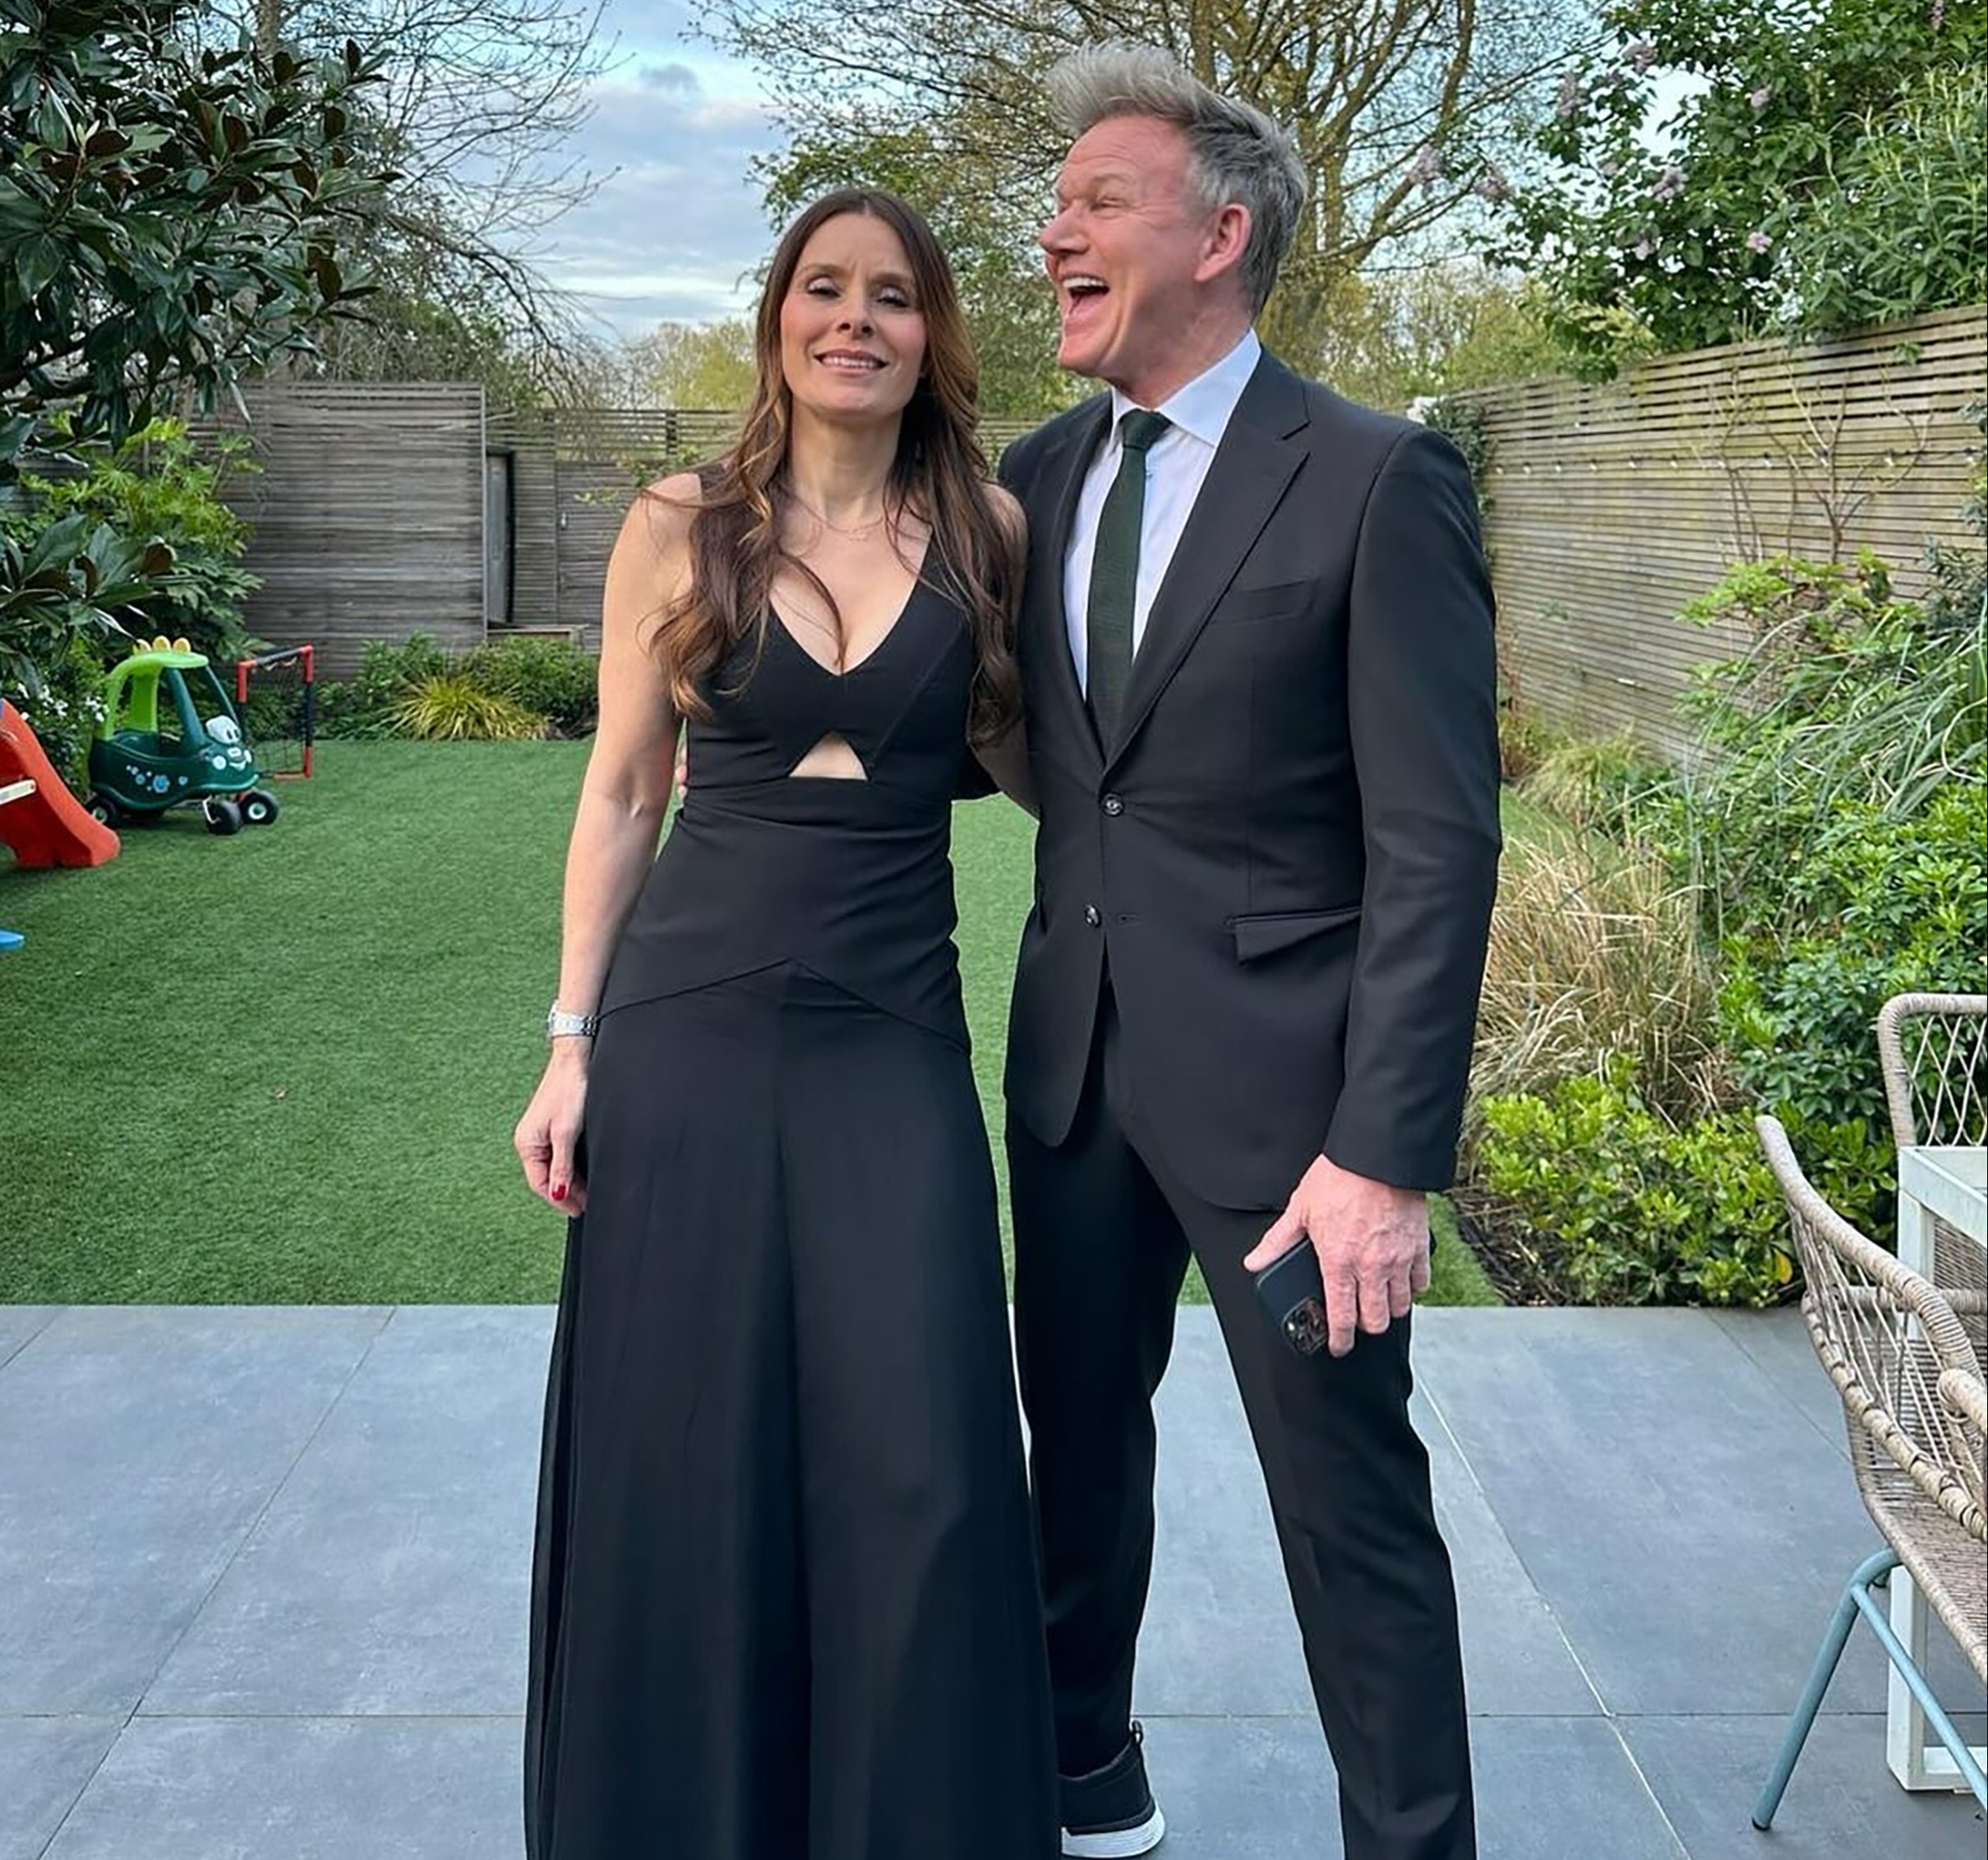 Chef Gordon Ramsay and wife Tana shared a picture at home before attending the party